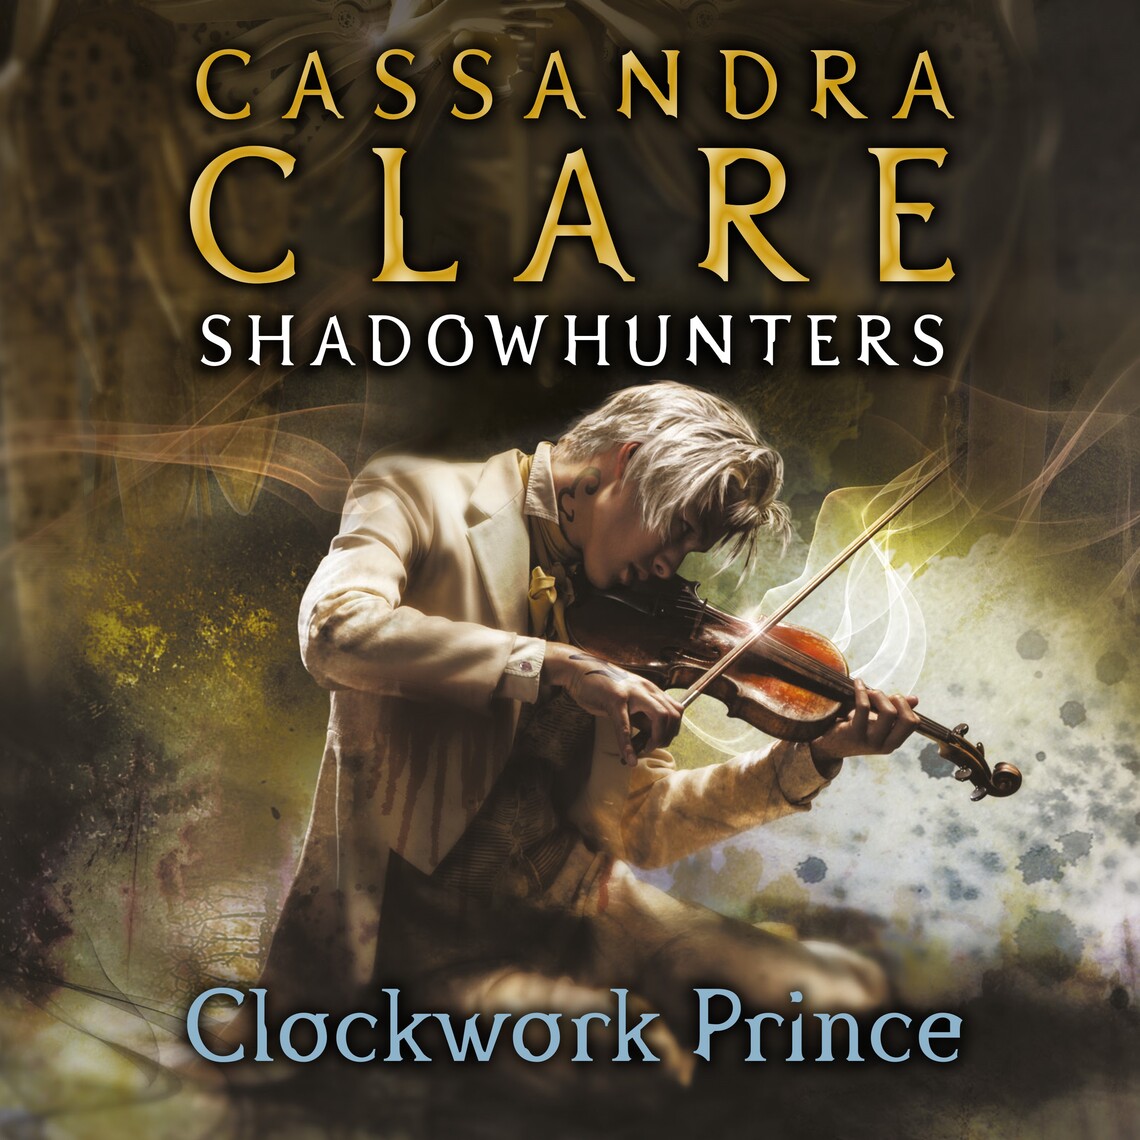 Cassandra Clare's Latest Shadowhunter Novel Chain of Gold Is a Lesson In  Friendship and Secrecy